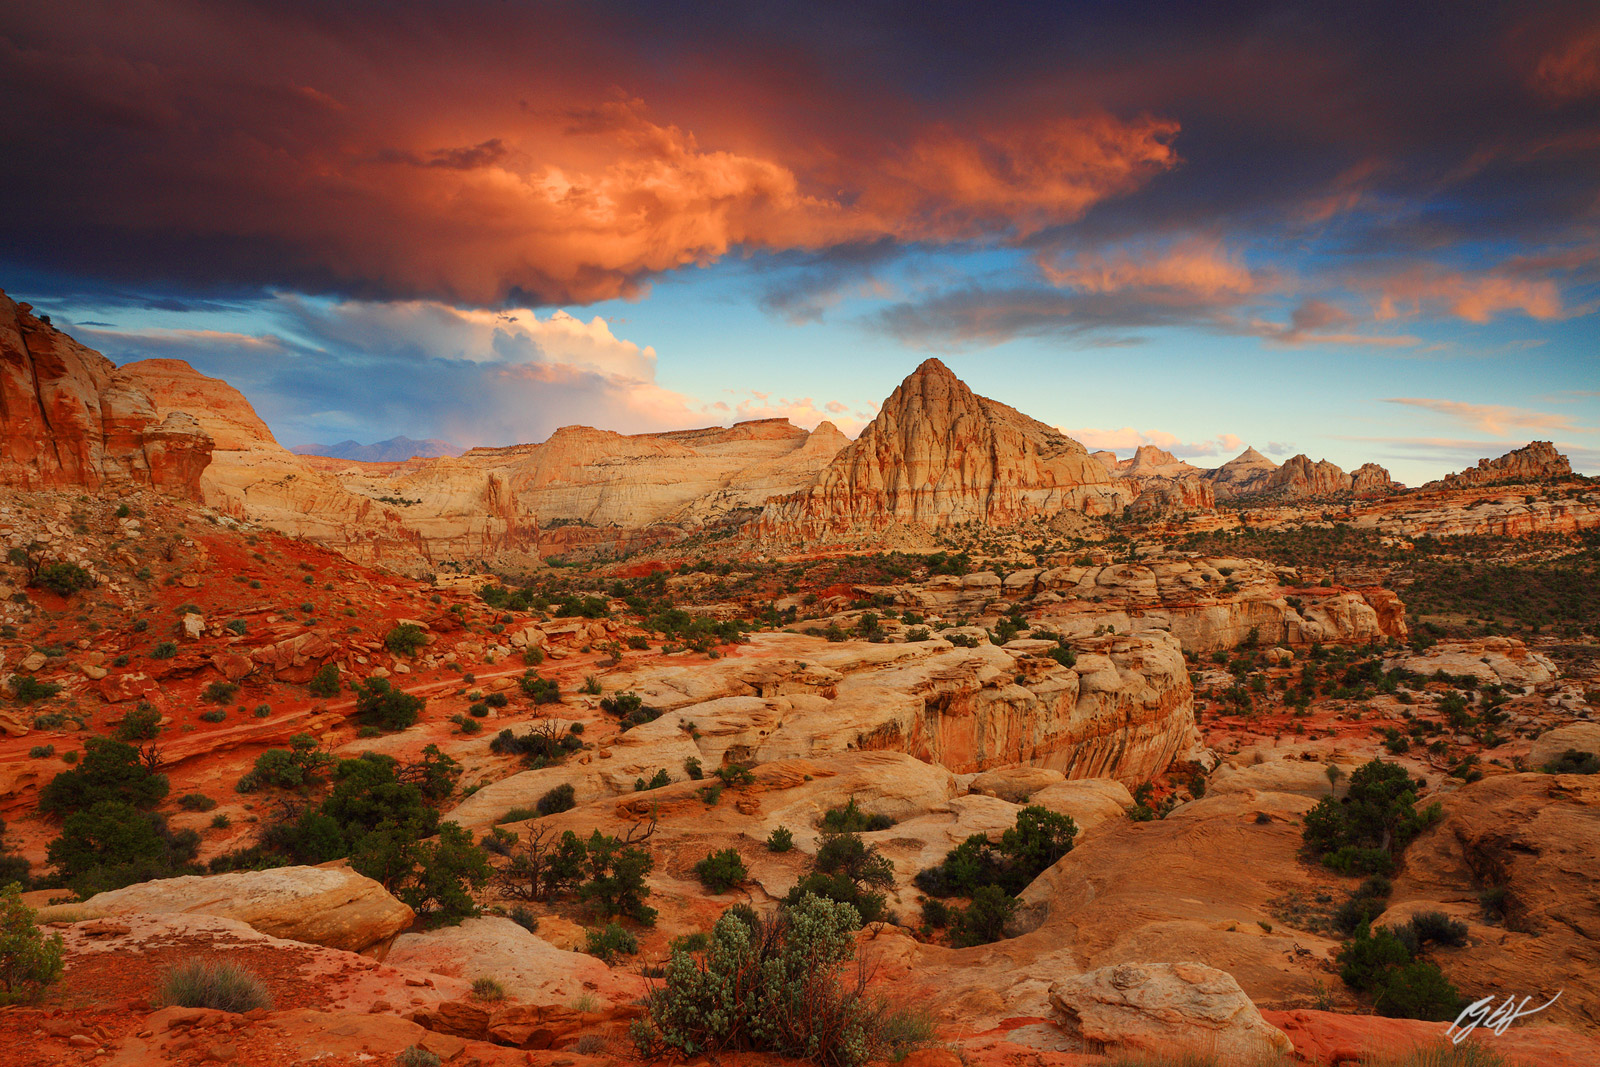 Sunset and Pectols Pyromid in Capital Reef National Park in Utah